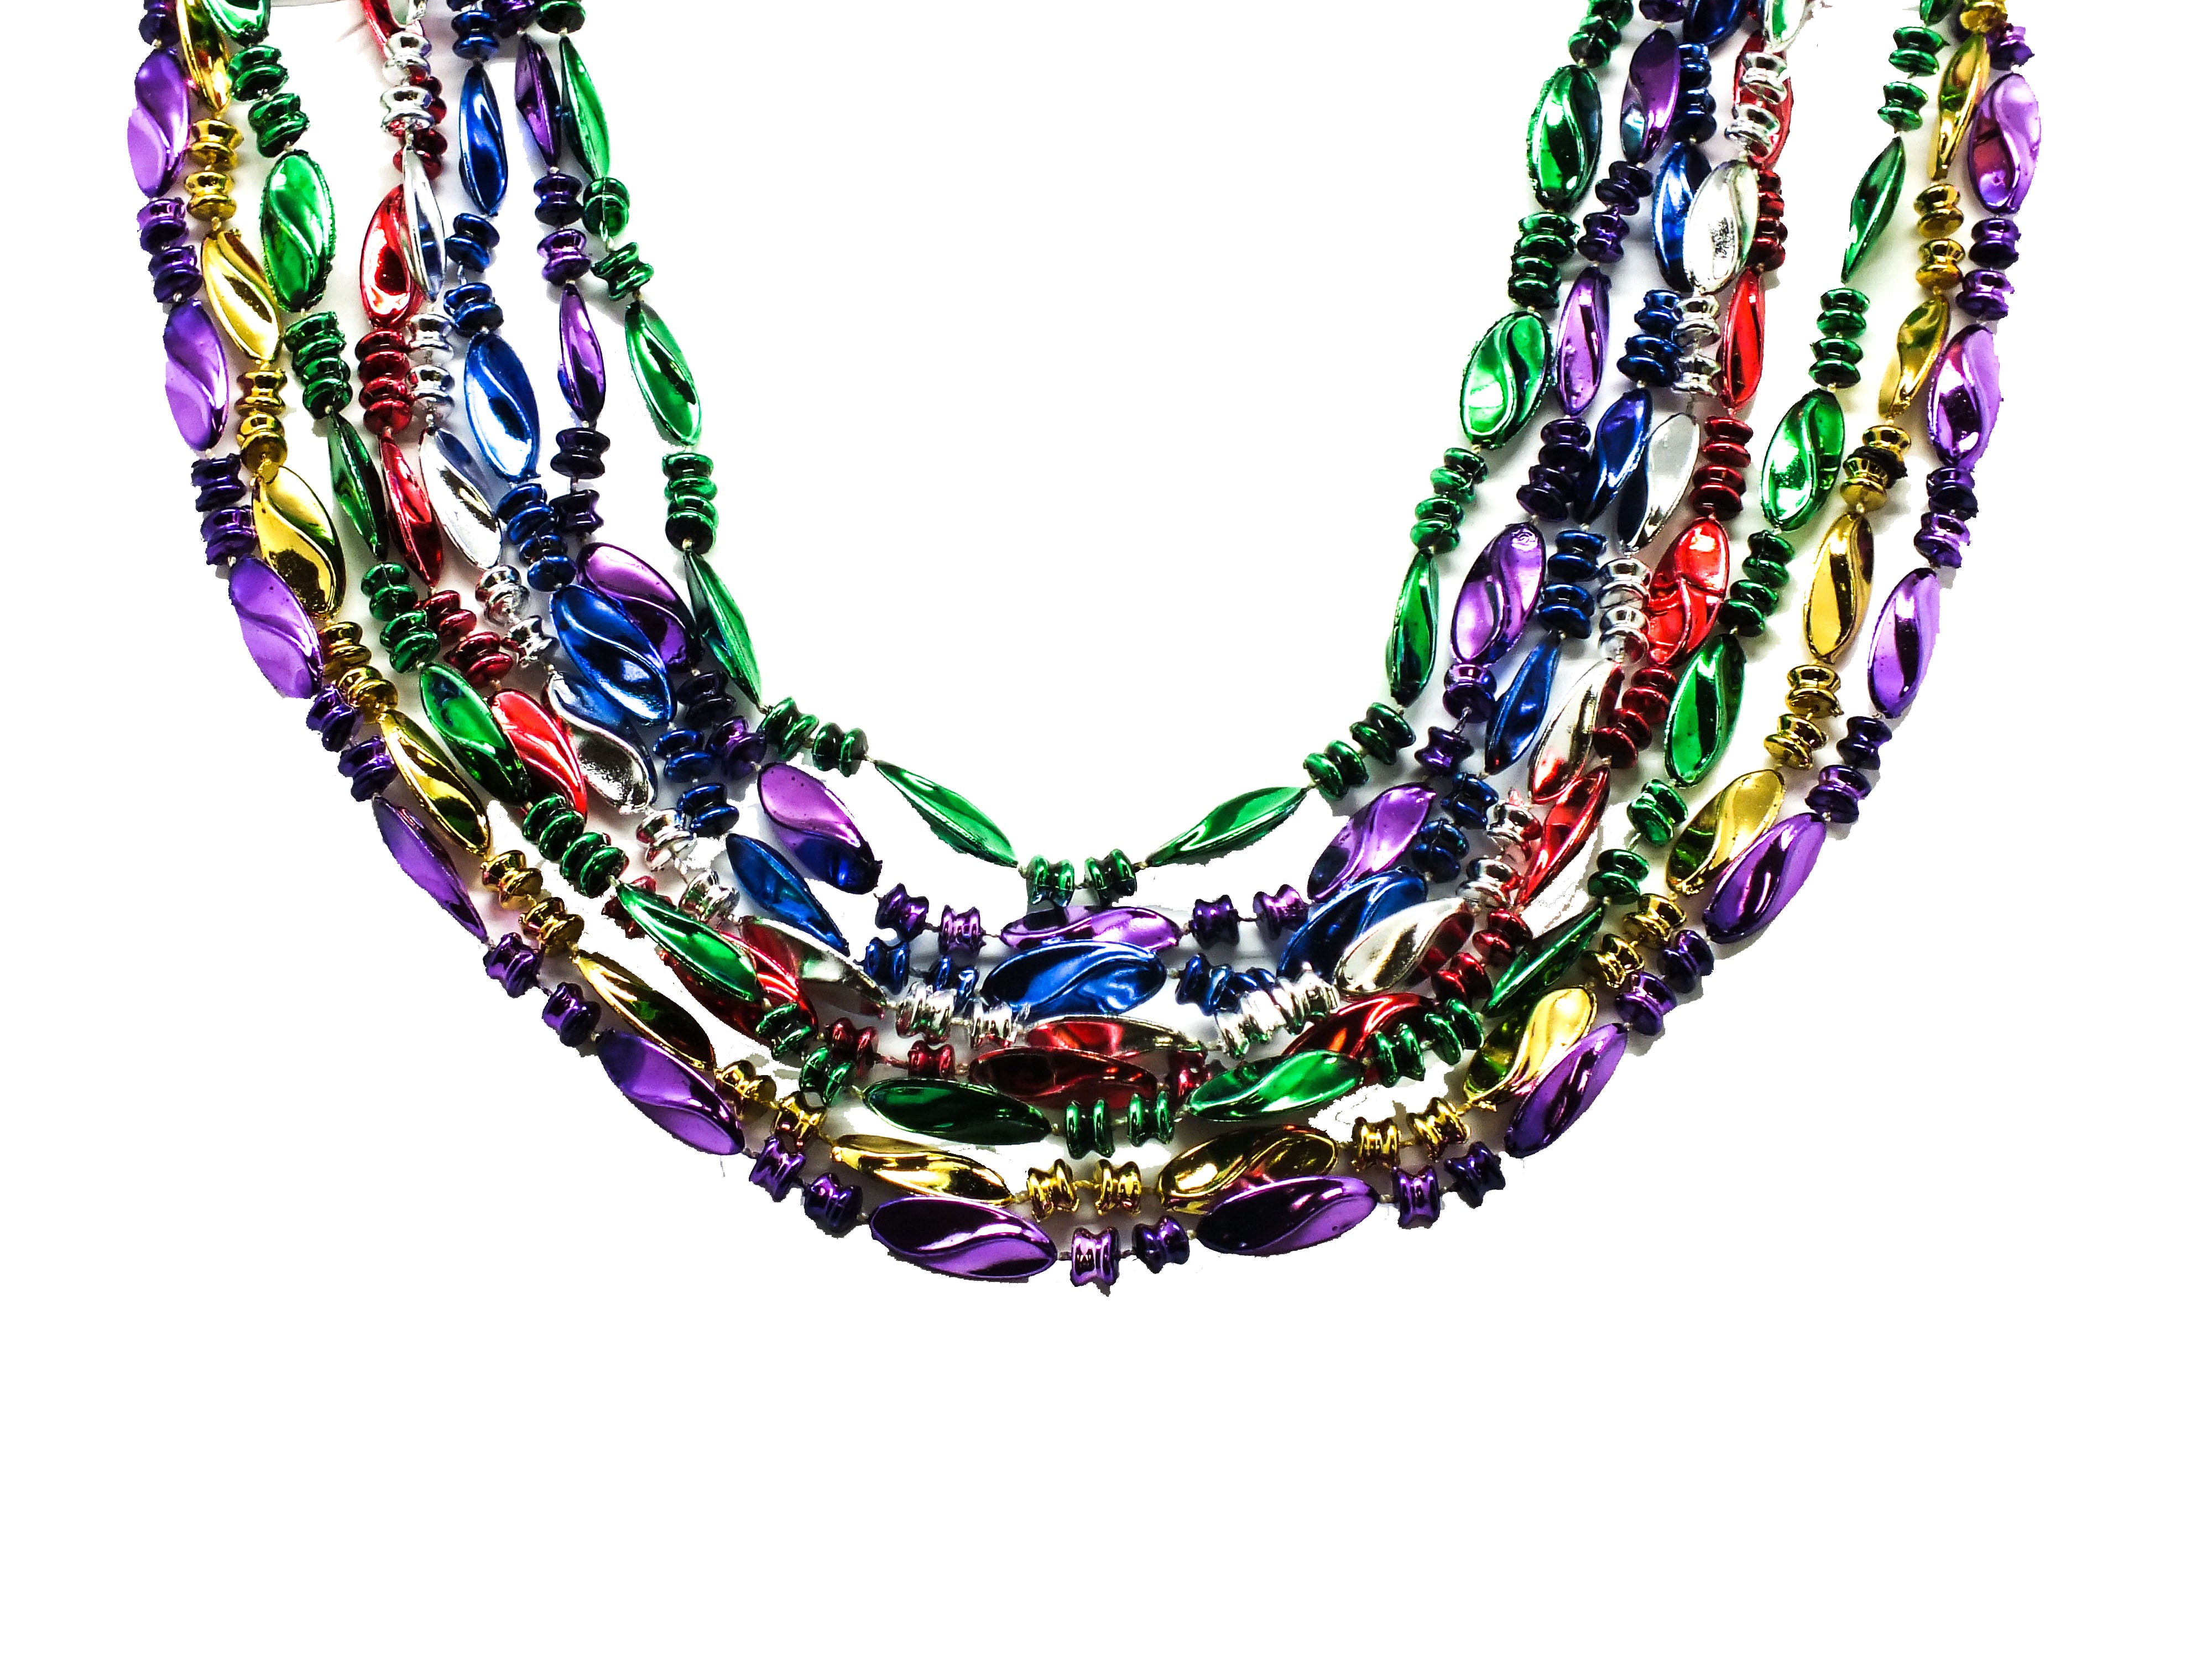 42" Twist Beads Assorted Colors